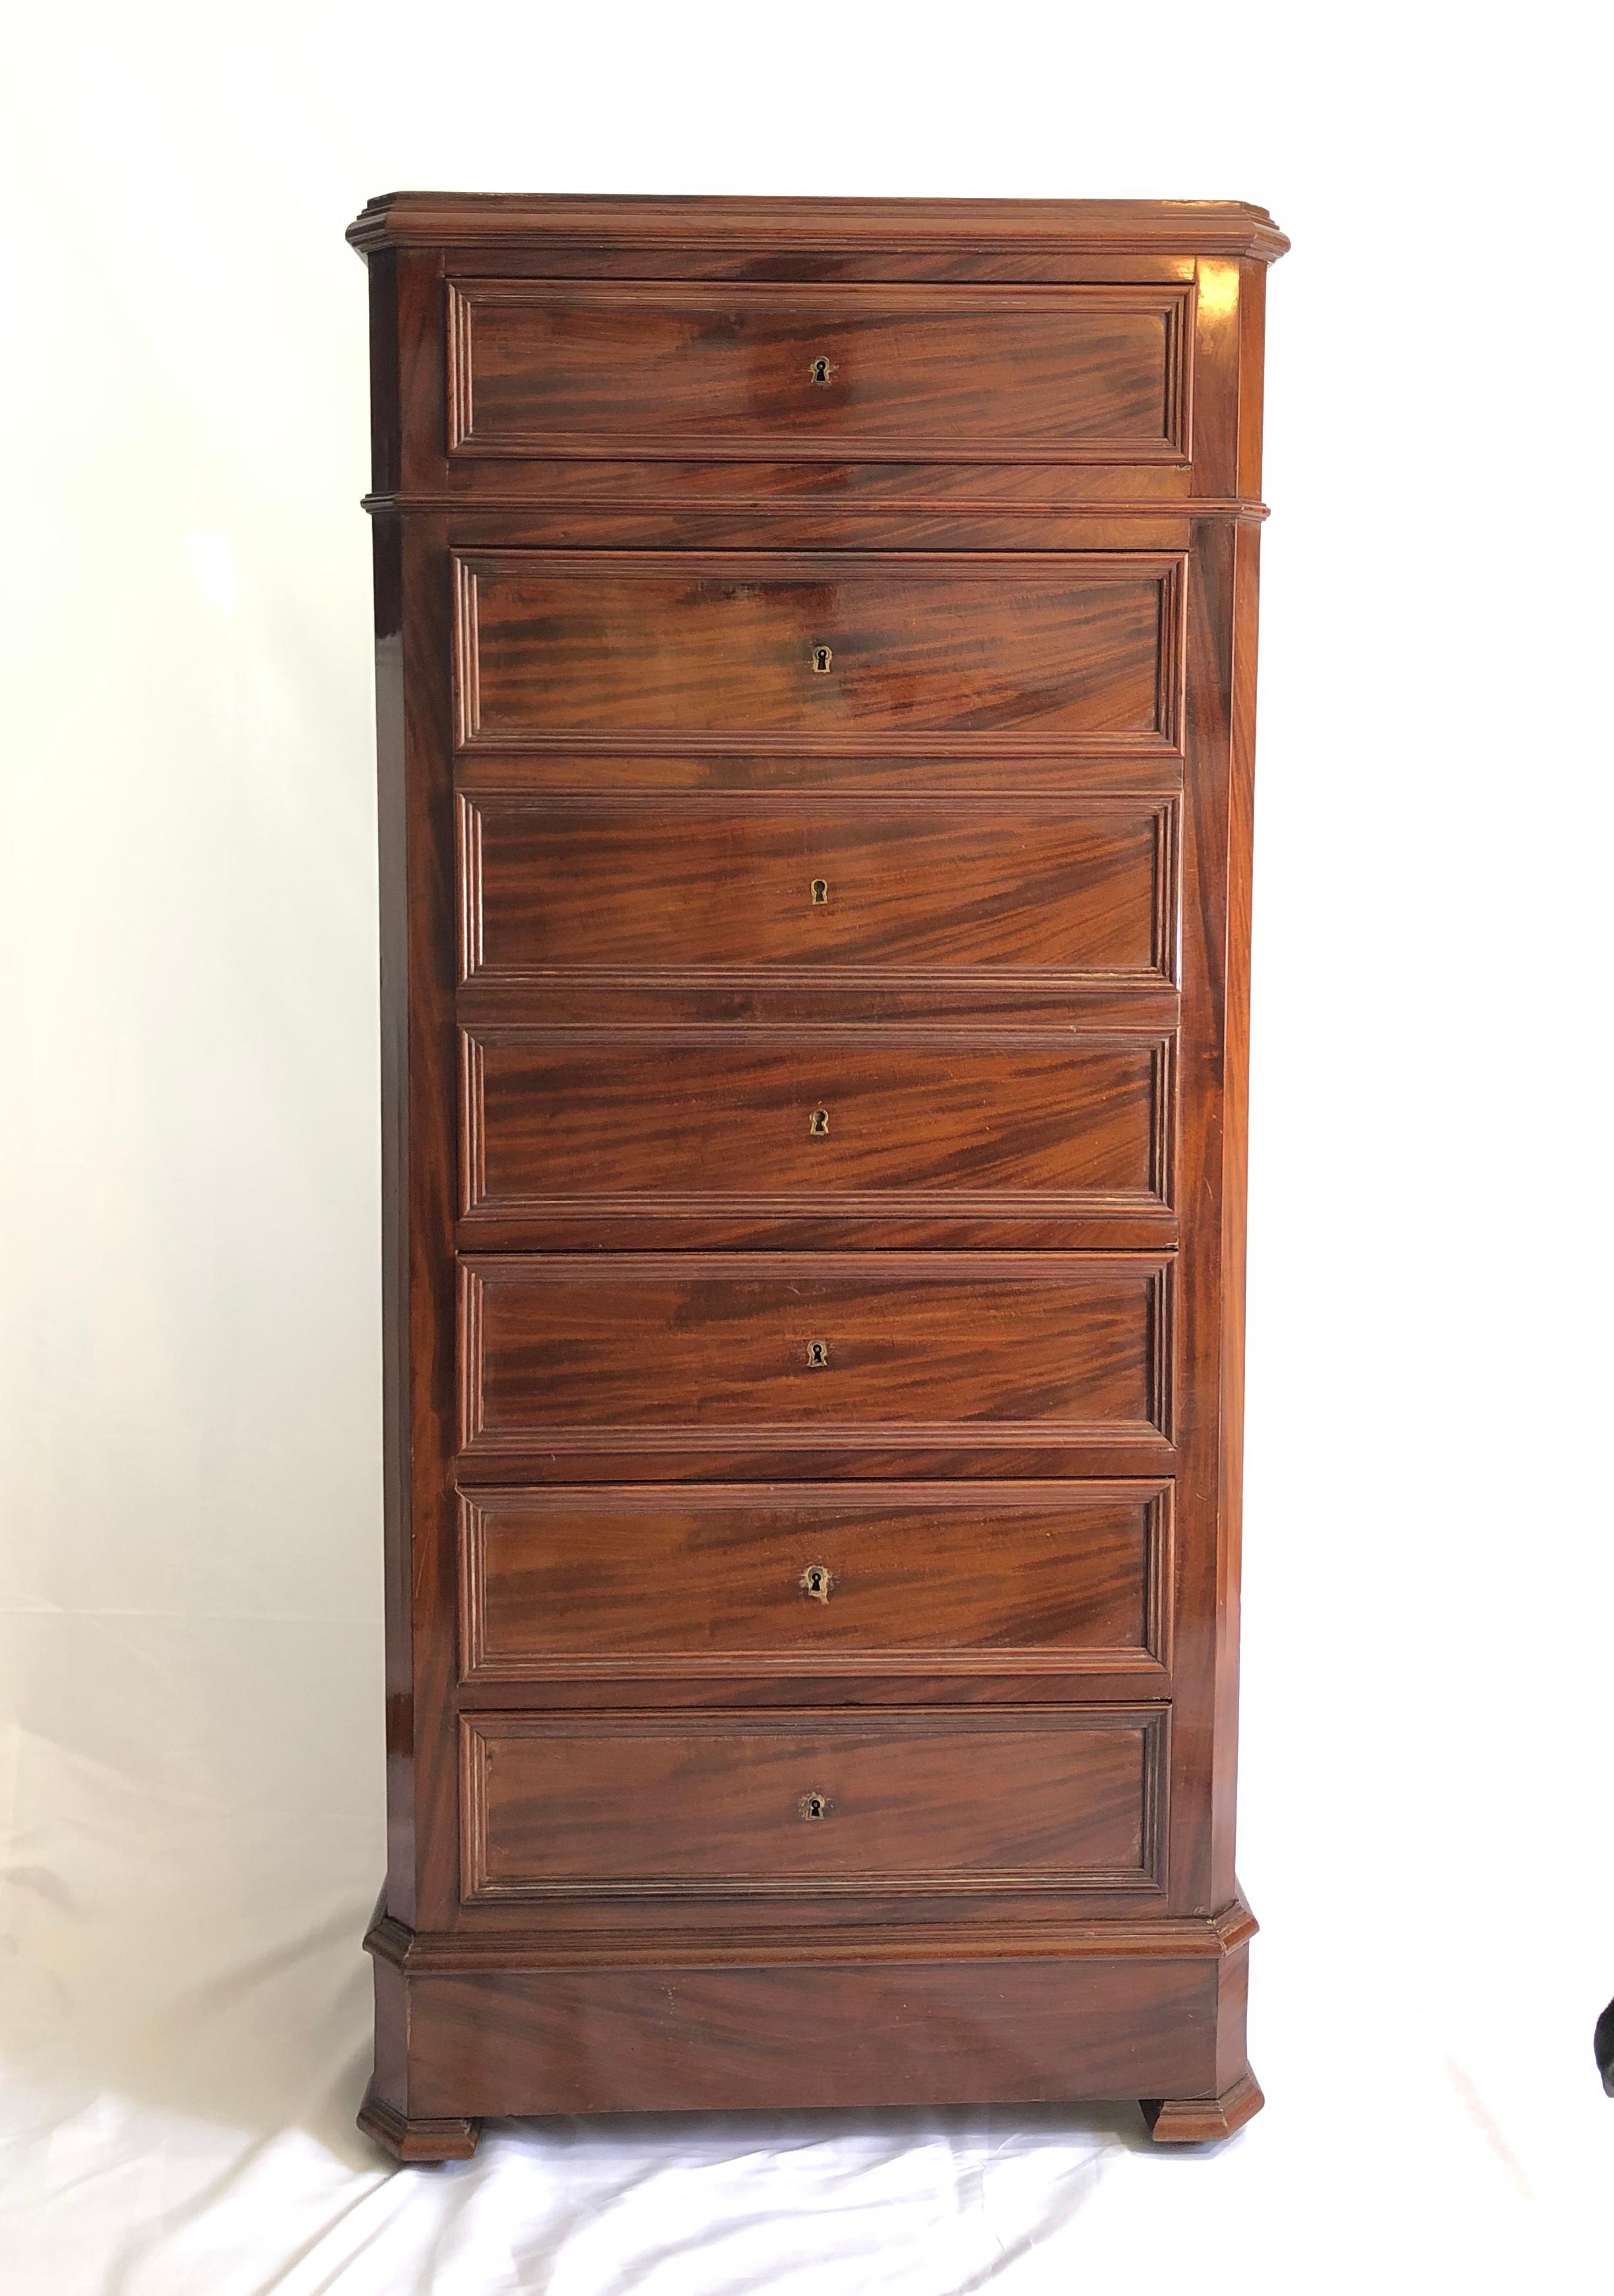 Beautiful warm highboy dresser with drop-front secretary. Leather embossed writing surface with 3 drawer storage. Perfect size with versatility for an apartment or stately home. Rich simplistic moldings add to elegance with 3 sided front feet. One